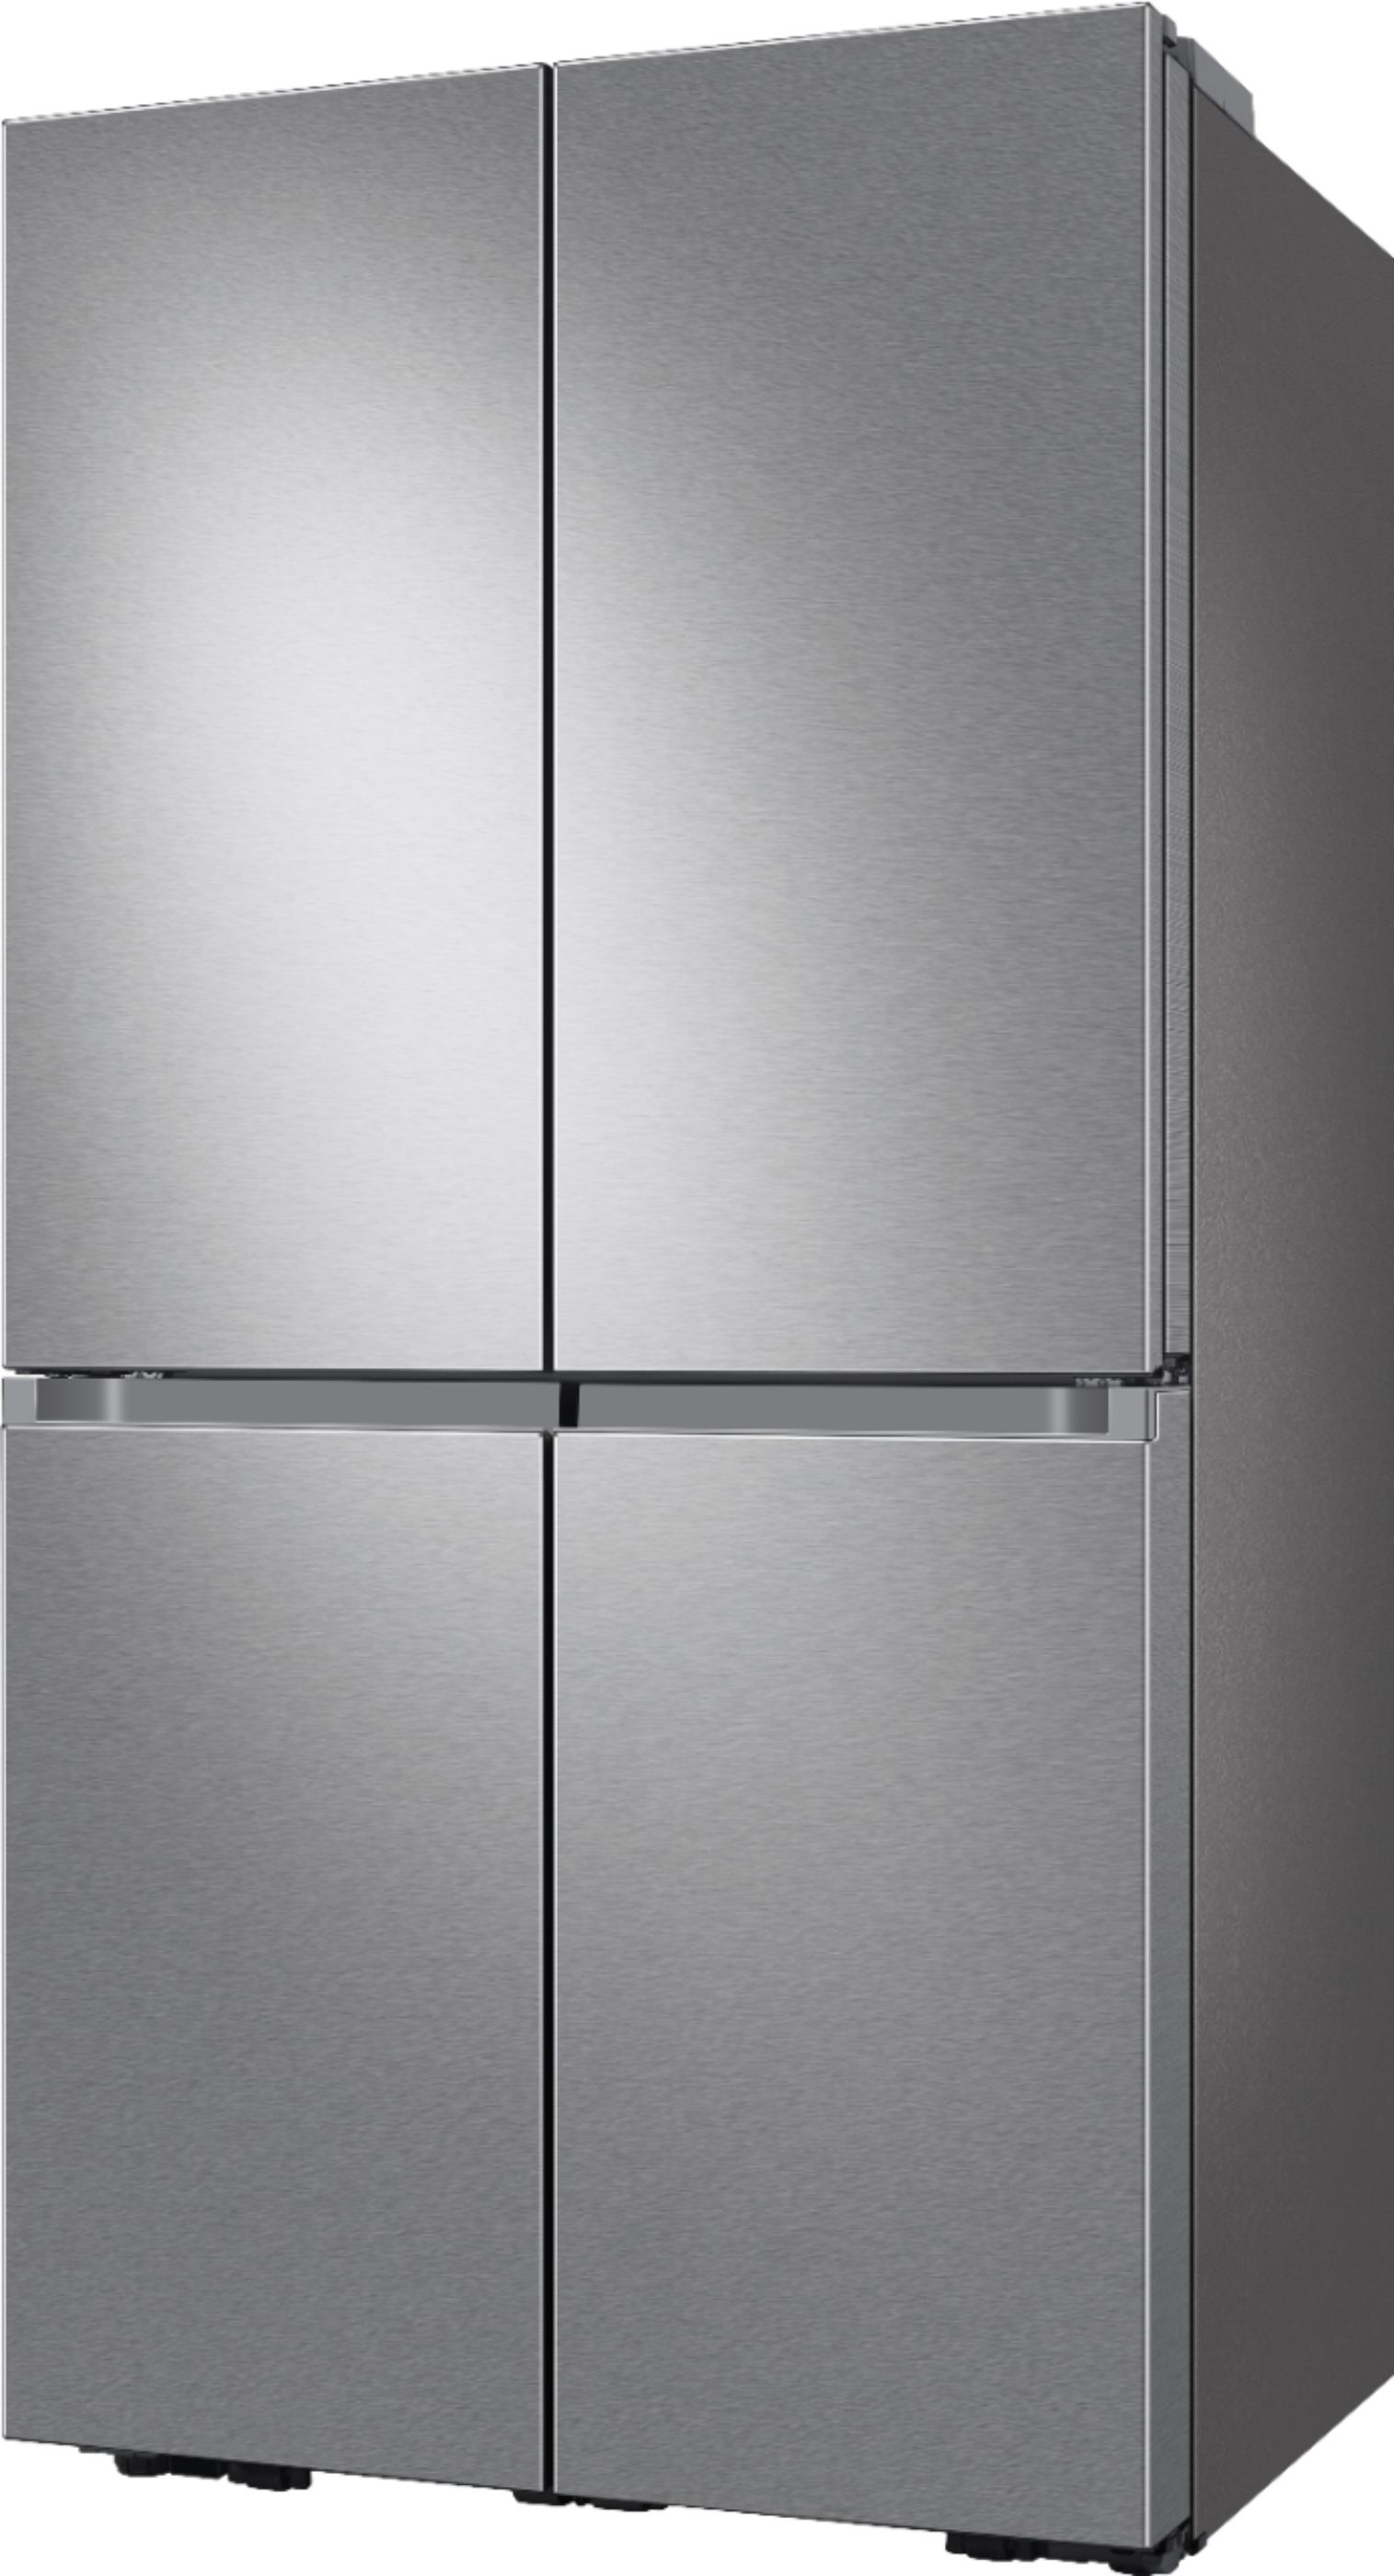 Angle View: Samsung - Bespoke 23 cu. ft. Counter Depth 4-Door French Door Refrigerator with AutoFill Water Pitcher - Custom Panel Ready